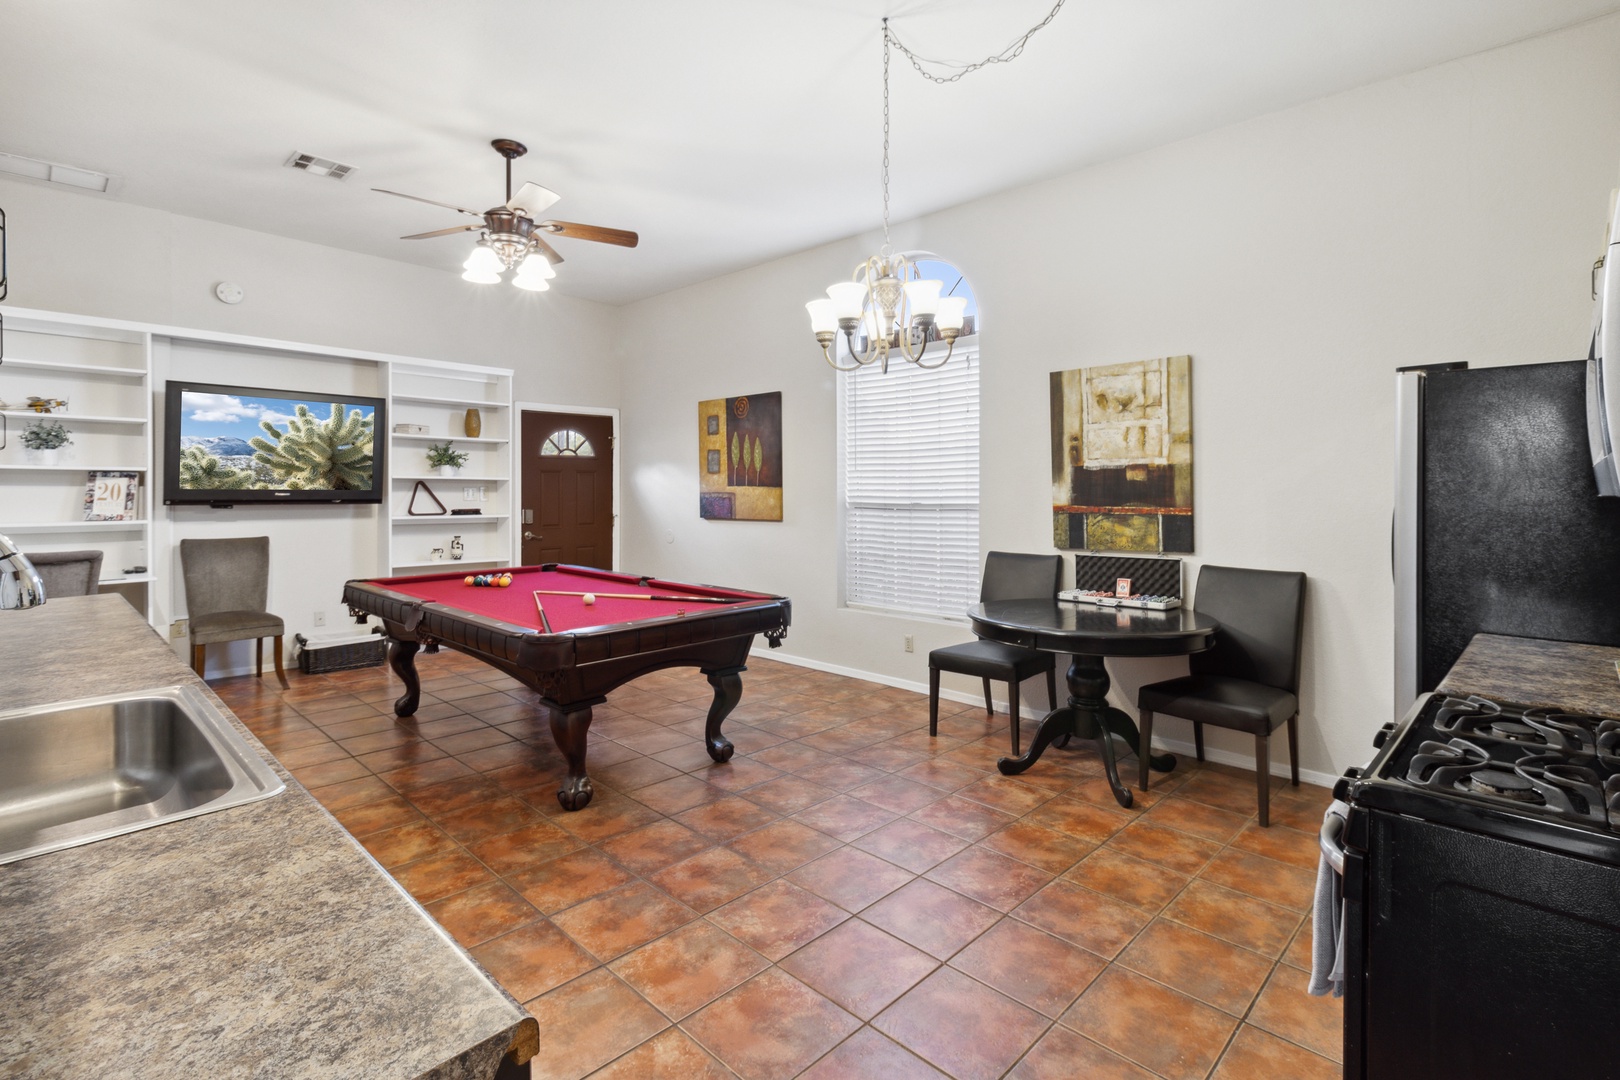 Scottsdale Vacation Rentals, OFB Thunderbird Retreat - Guest casita with pool table and kitchen